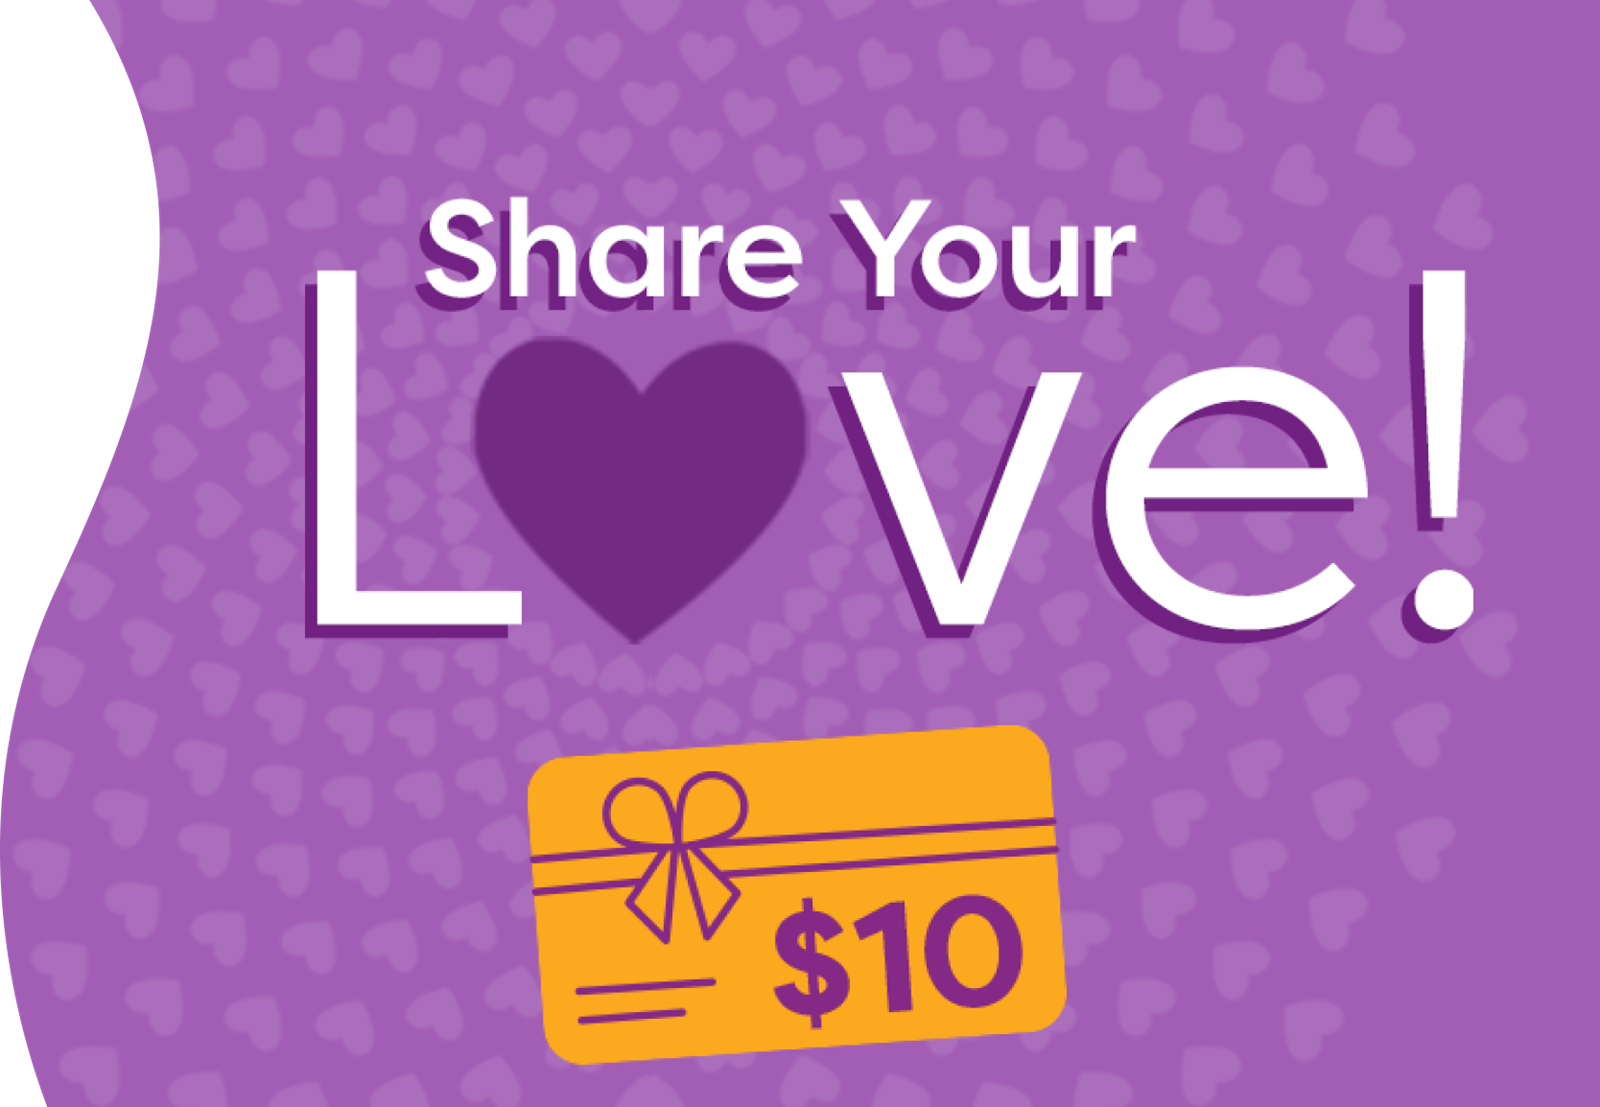 Image with a gift card and text that says 'Share The Love'